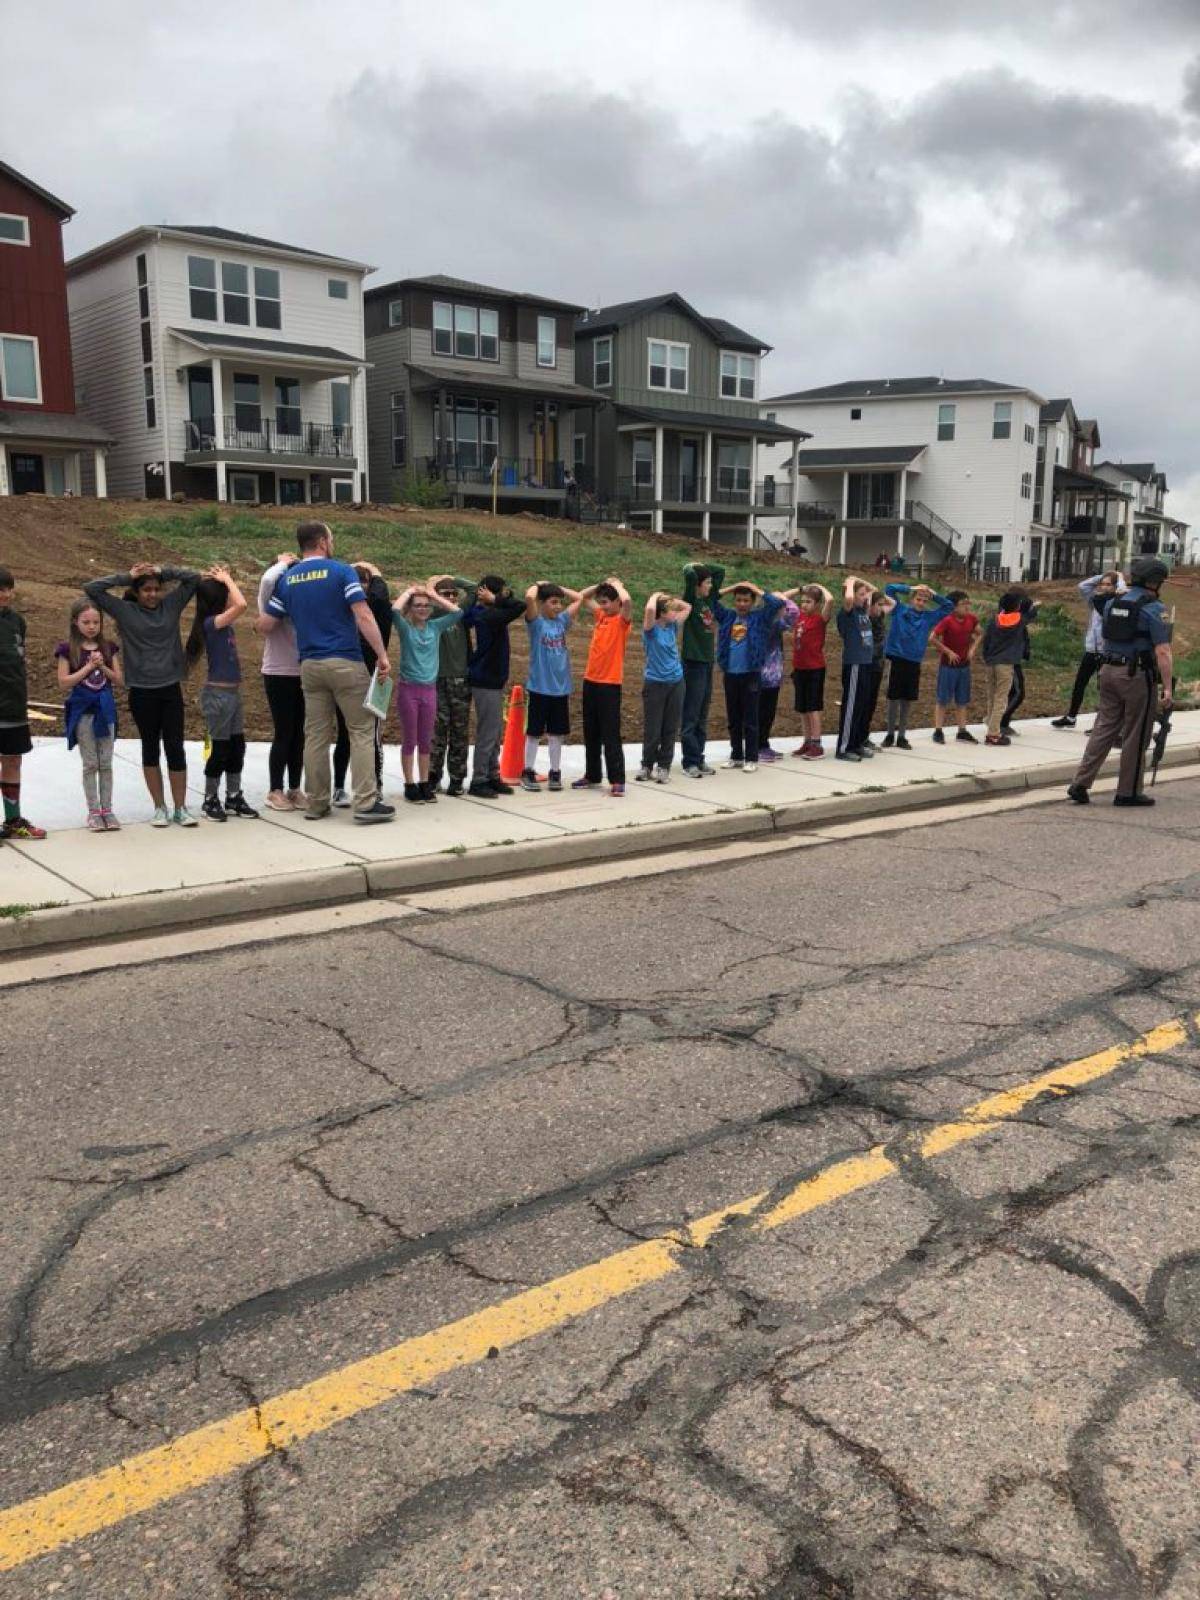 Schoolchildren stand in a line outside near the STEM School during a shooting incident in Highlands Ranch, Colorado, U.S. in this May 7, 2019 image obtained via social media